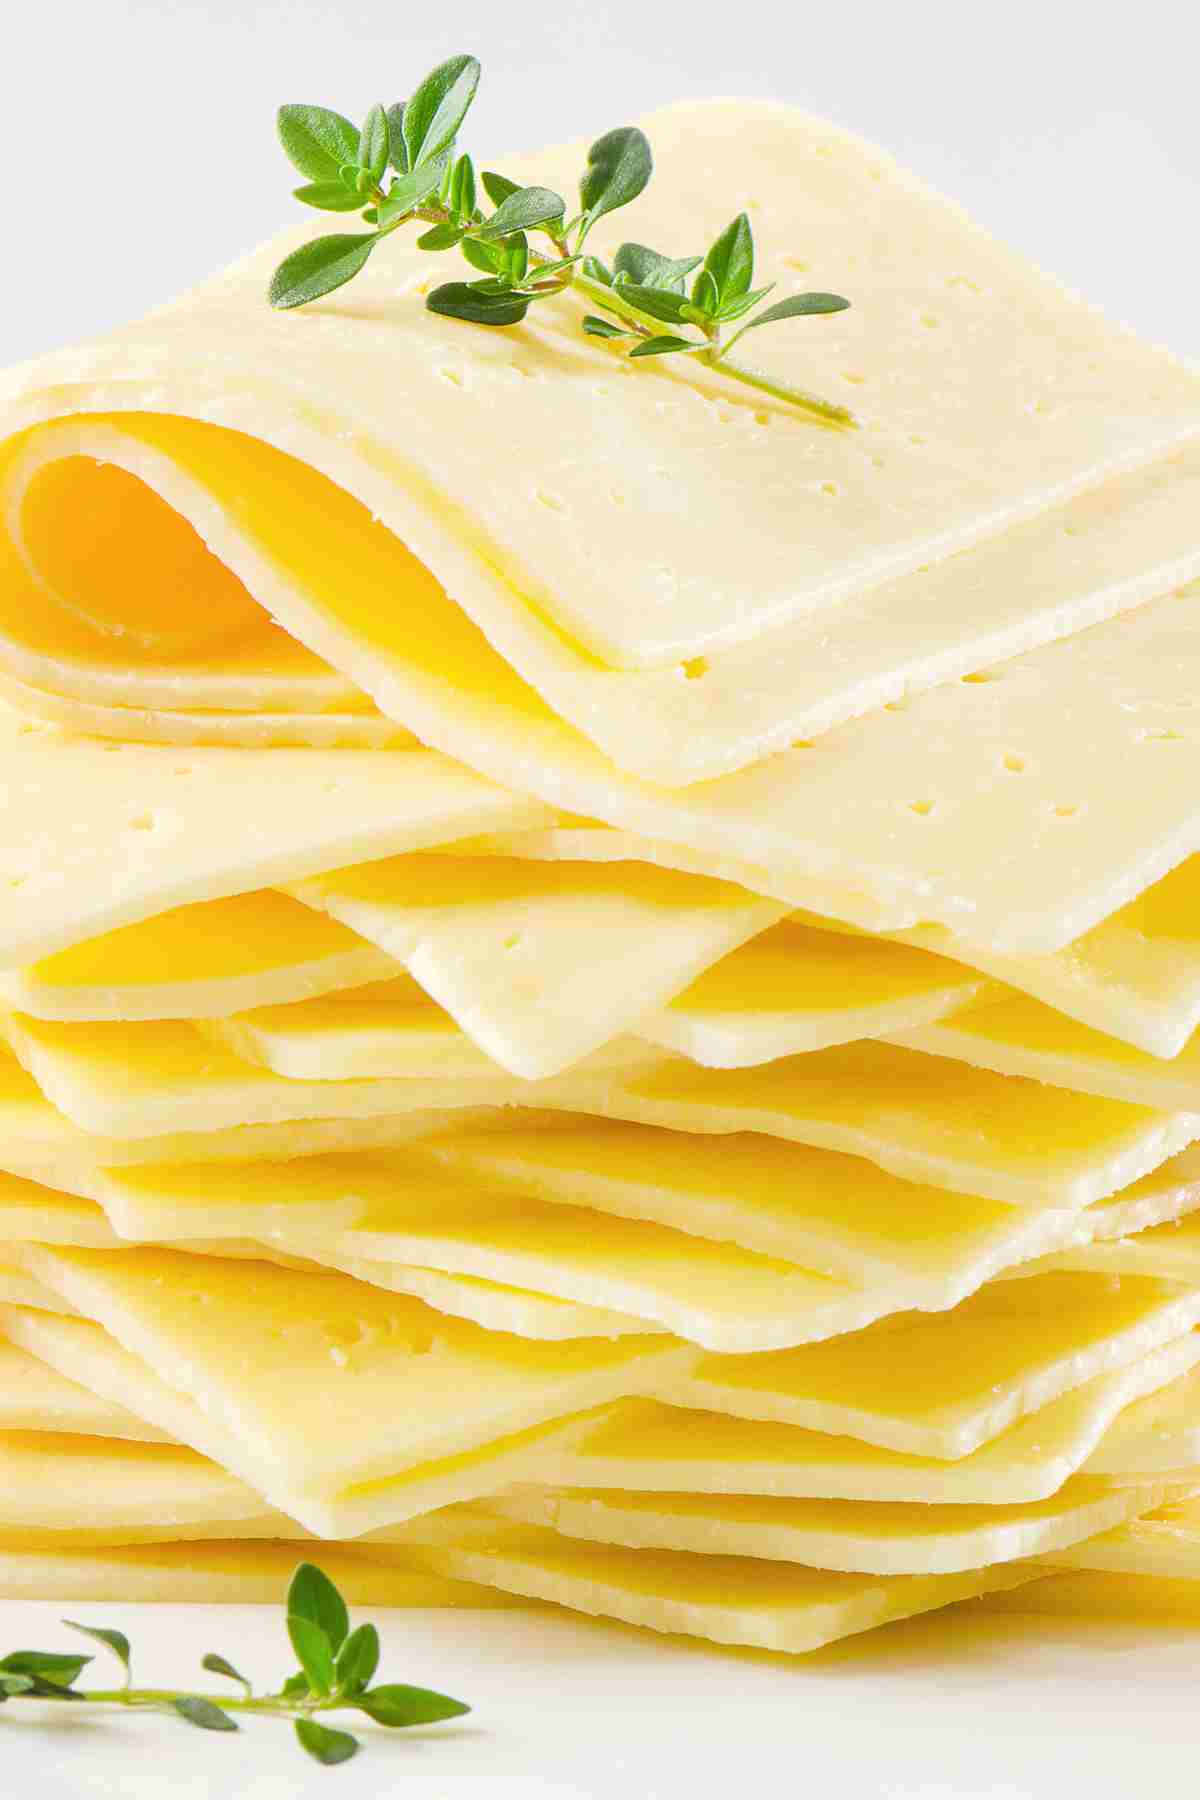 cheese slices in a pile.